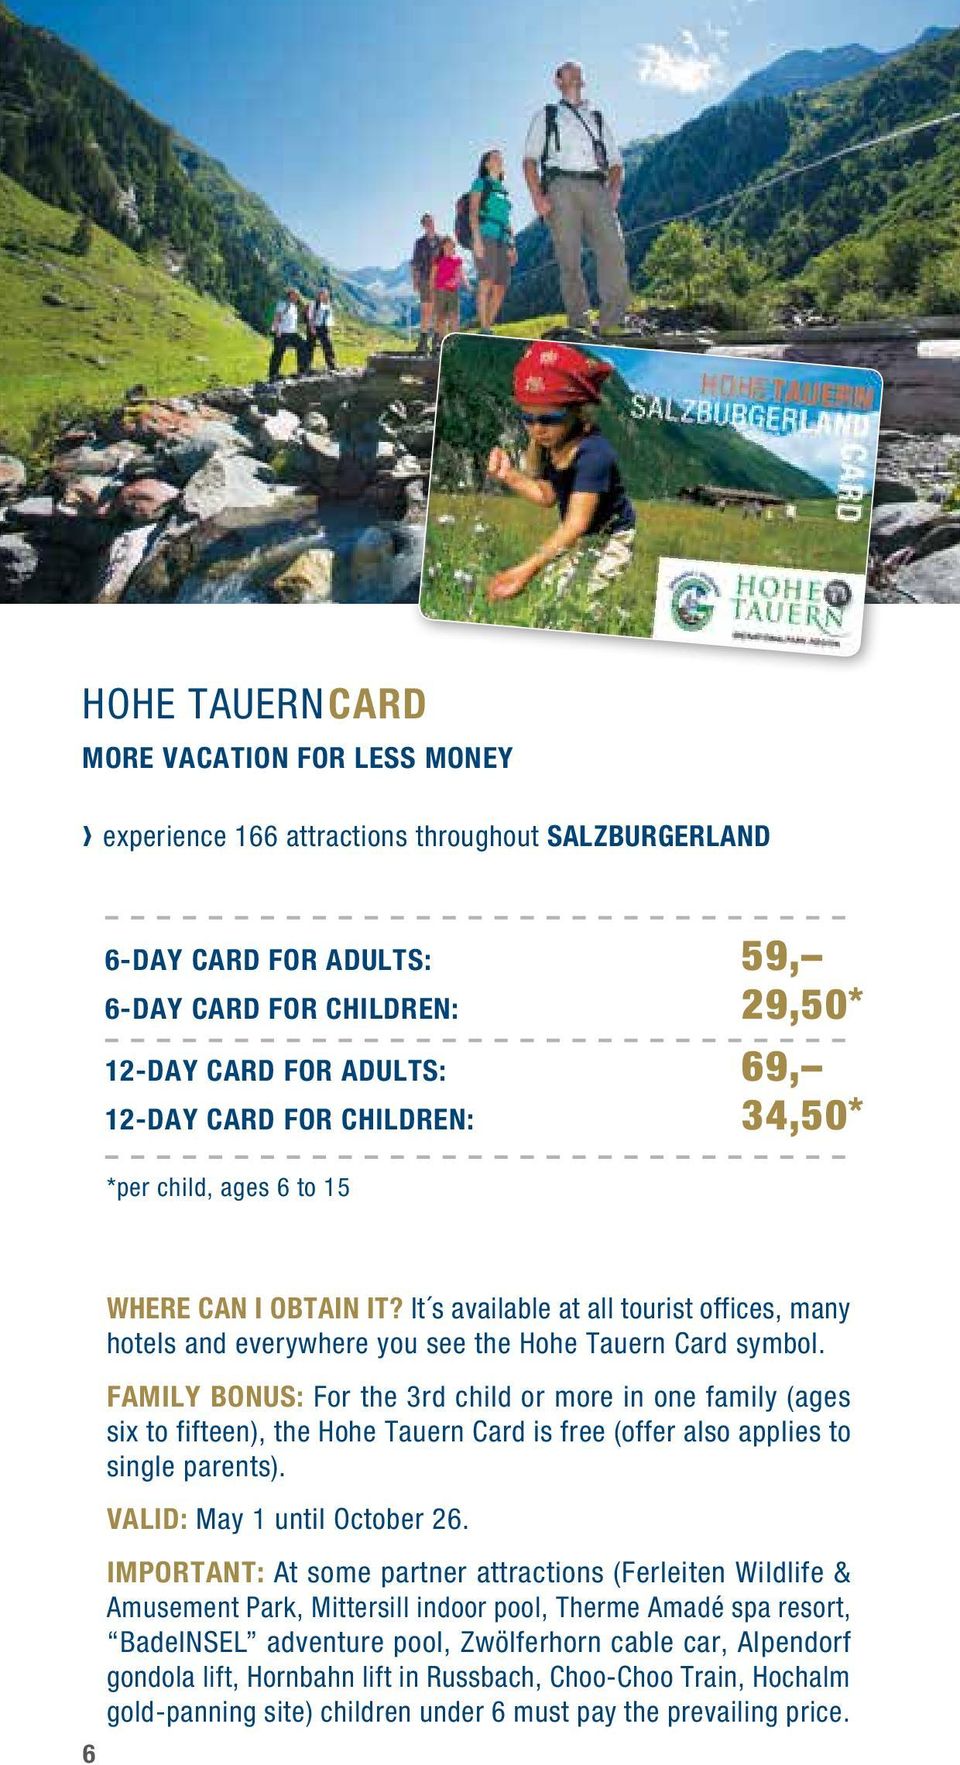 Family bonus: For the 3rd child or more in one family (ages six to fifteen), the Hohe Tauern Card is free (offer also applies to single parents). Valid: May 1 until October 26.